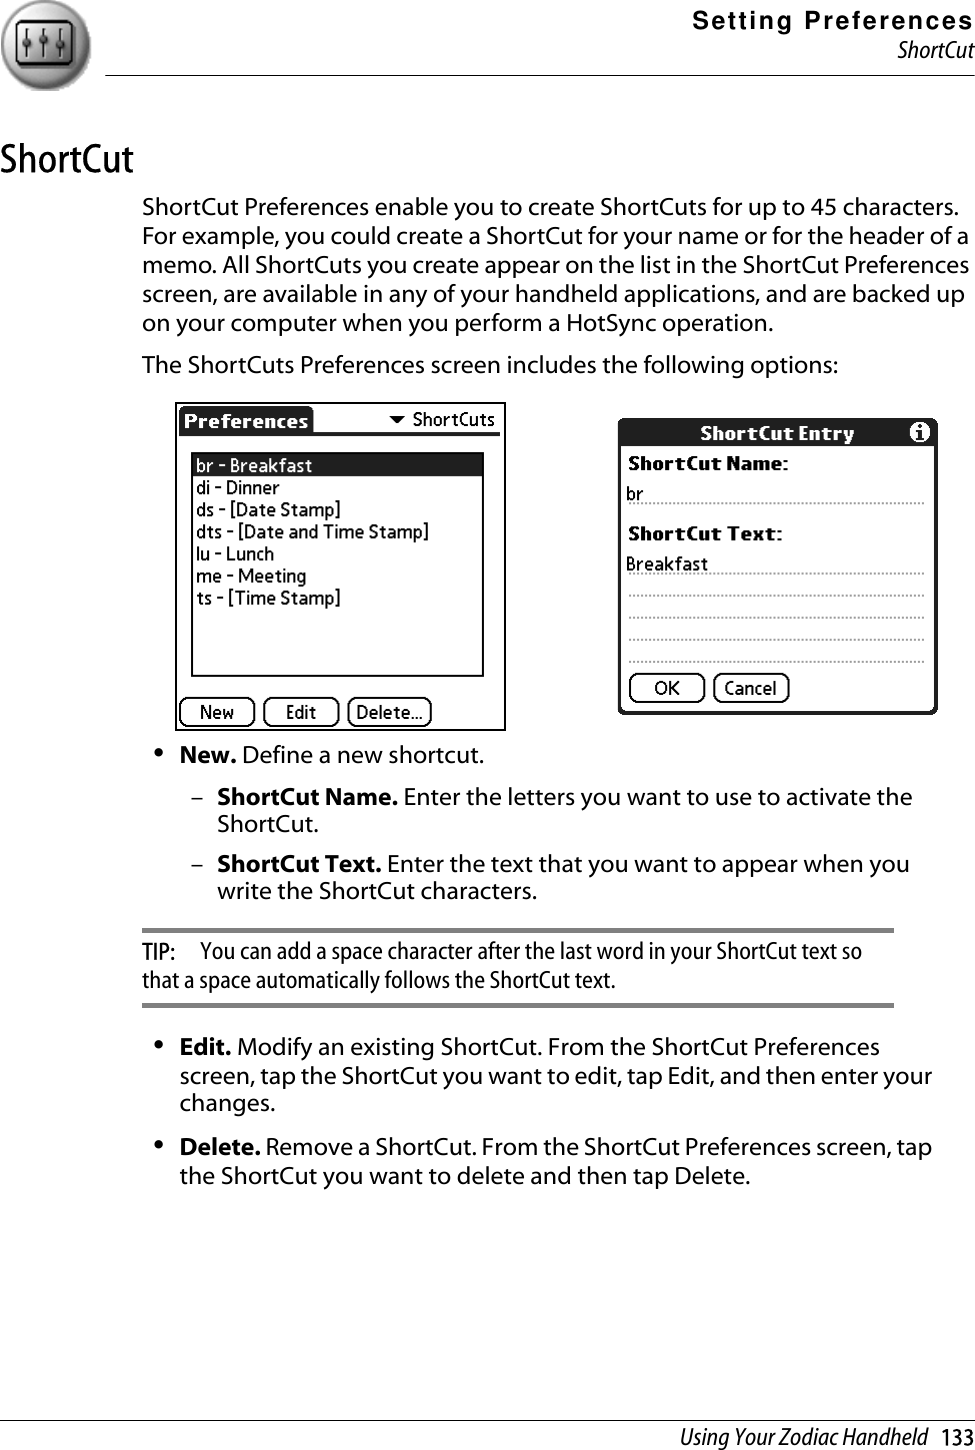 Setting PreferencesShortCutUsing Your Zodiac Handheld   133ShortCutShortCut Preferences enable you to create ShortCuts for up to 45 characters. For example, you could create a ShortCut for your name or for the header of a memo. All ShortCuts you create appear on the list in the ShortCut Preferences screen, are available in any of your handheld applications, and are backed up on your computer when you perform a HotSync operation.The ShortCuts Preferences screen includes the following options:•New. Define a new shortcut.–ShortCut Name. Enter the letters you want to use to activate the ShortCut.–ShortCut Text. Enter the text that you want to appear when you write the ShortCut characters. TIP:  You can add a space character after the last word in your ShortCut text so that a space automatically follows the ShortCut text.•Edit. Modify an existing ShortCut. From the ShortCut Preferences screen, tap the ShortCut you want to edit, tap Edit, and then enter your changes.•Delete. Remove a ShortCut. From the ShortCut Preferences screen, tap the ShortCut you want to delete and then tap Delete.